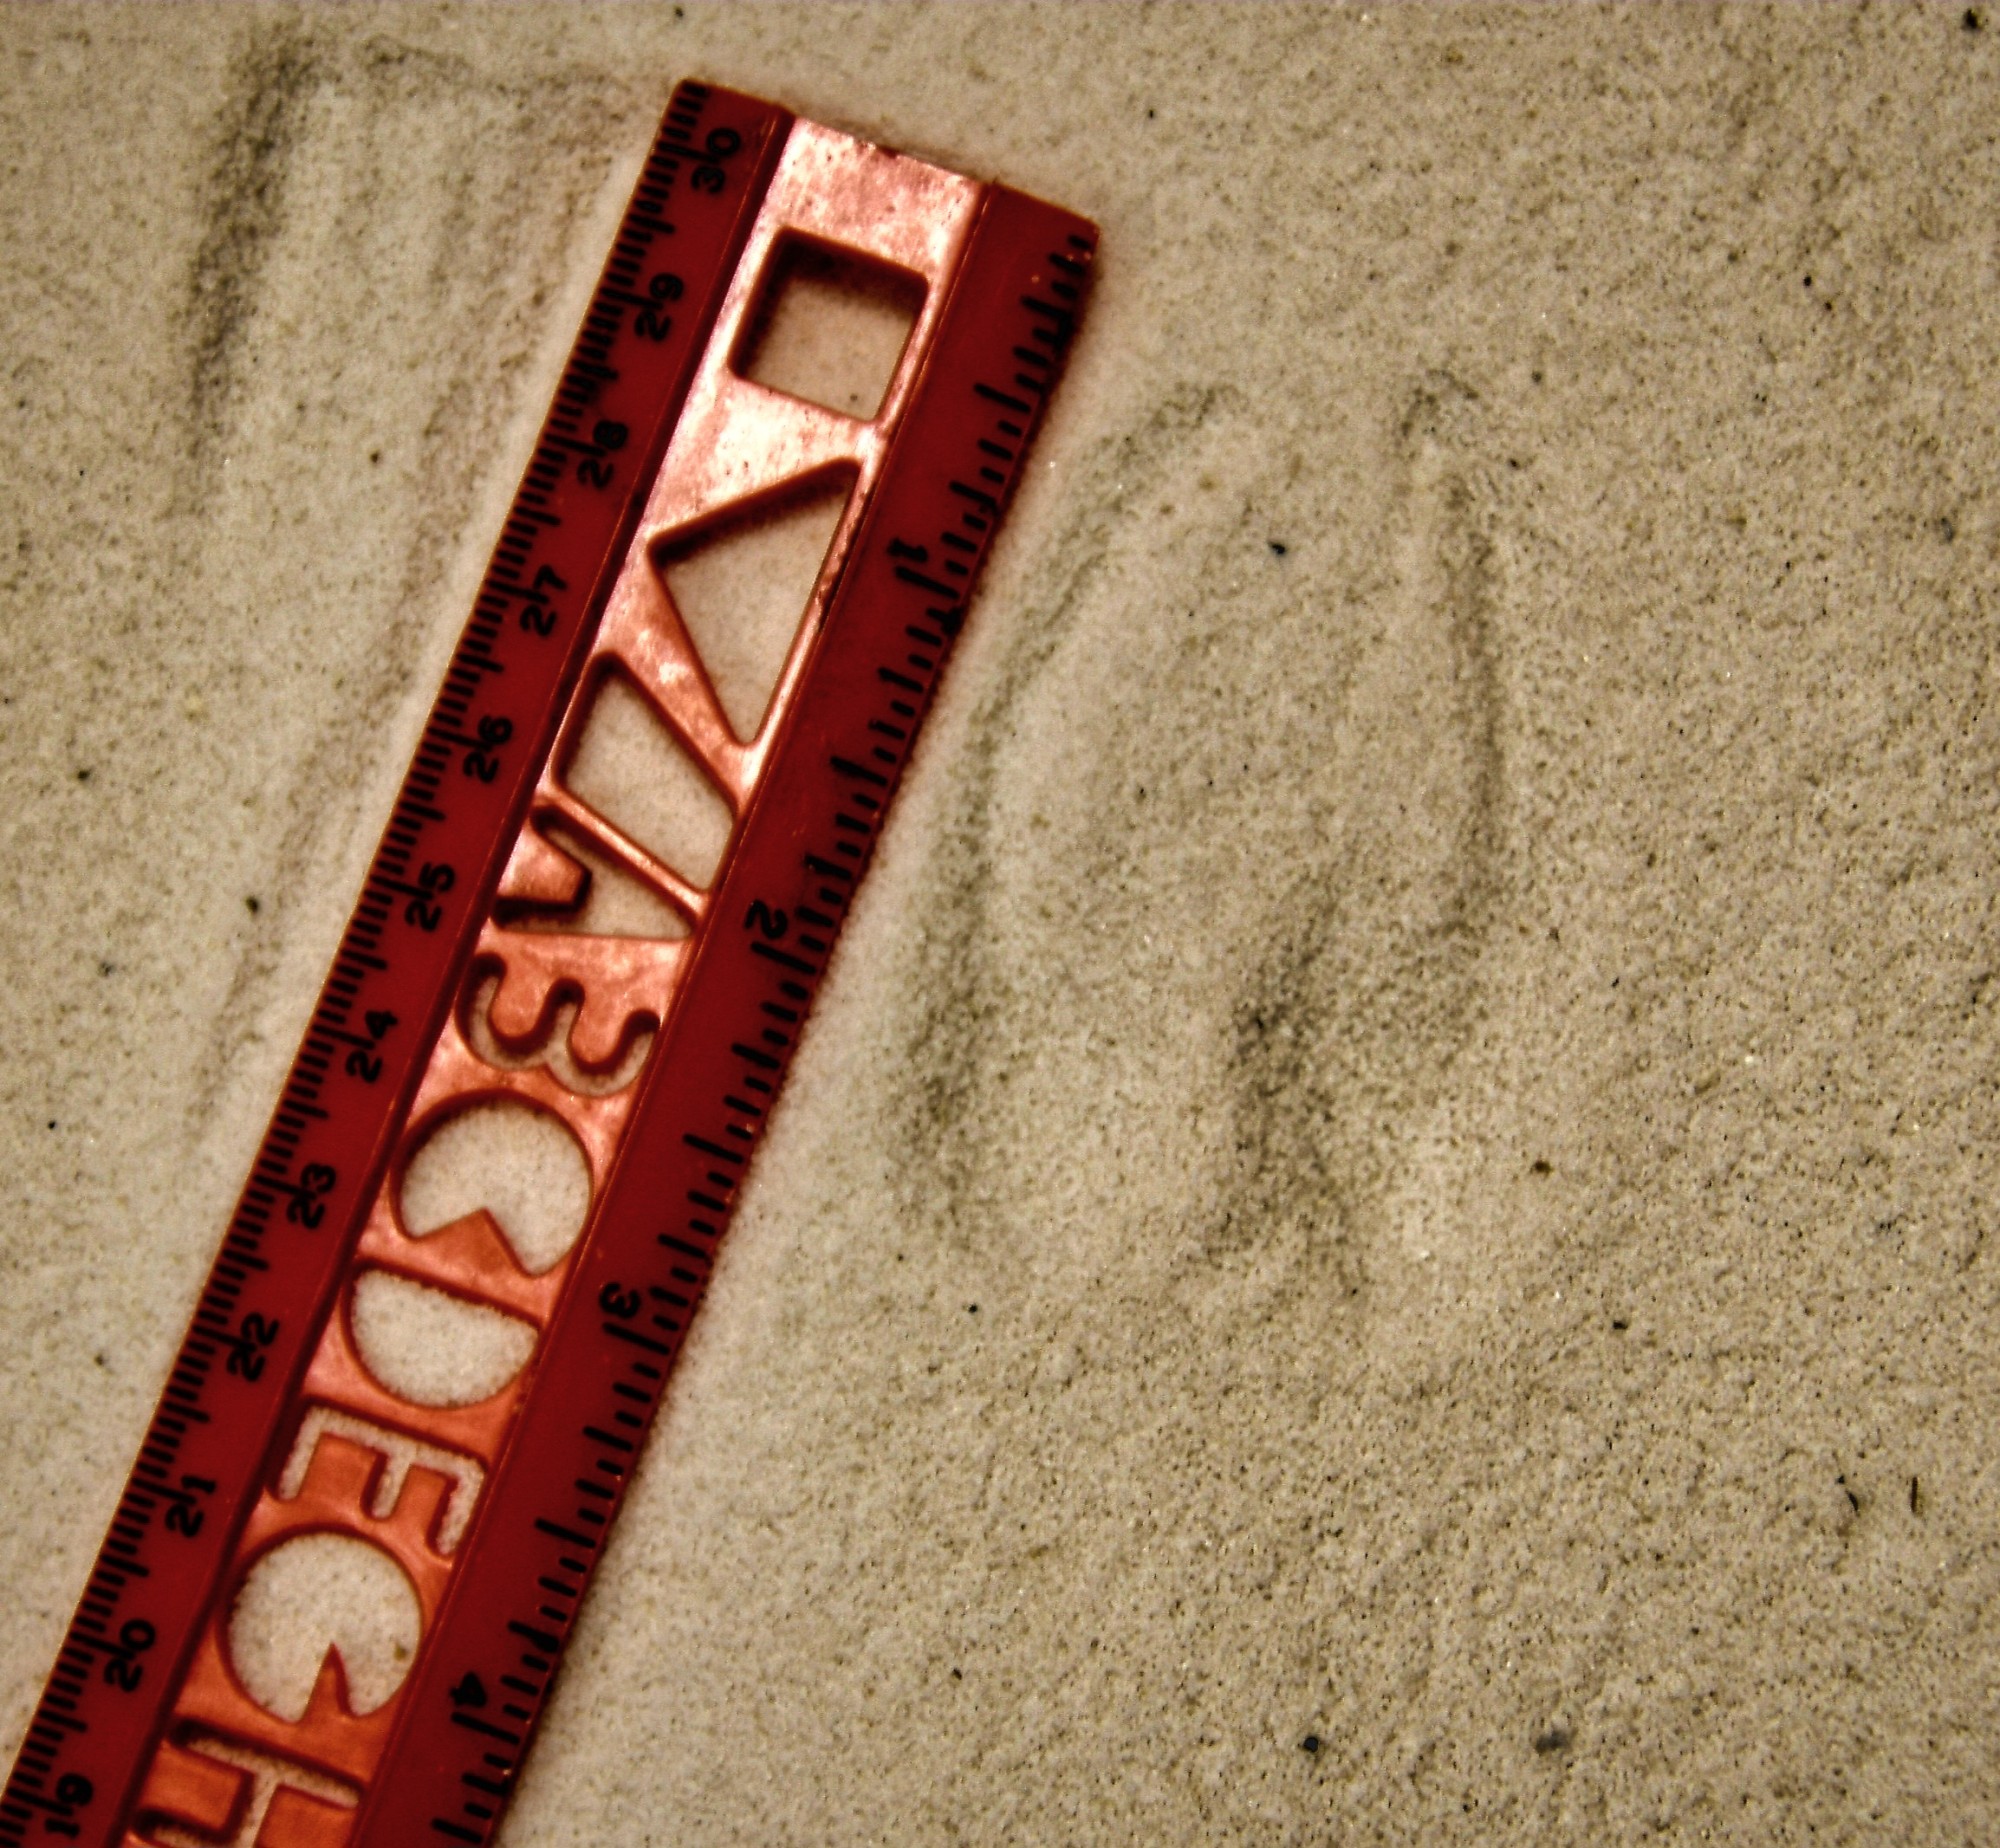 deer track in the sand next to a ruler